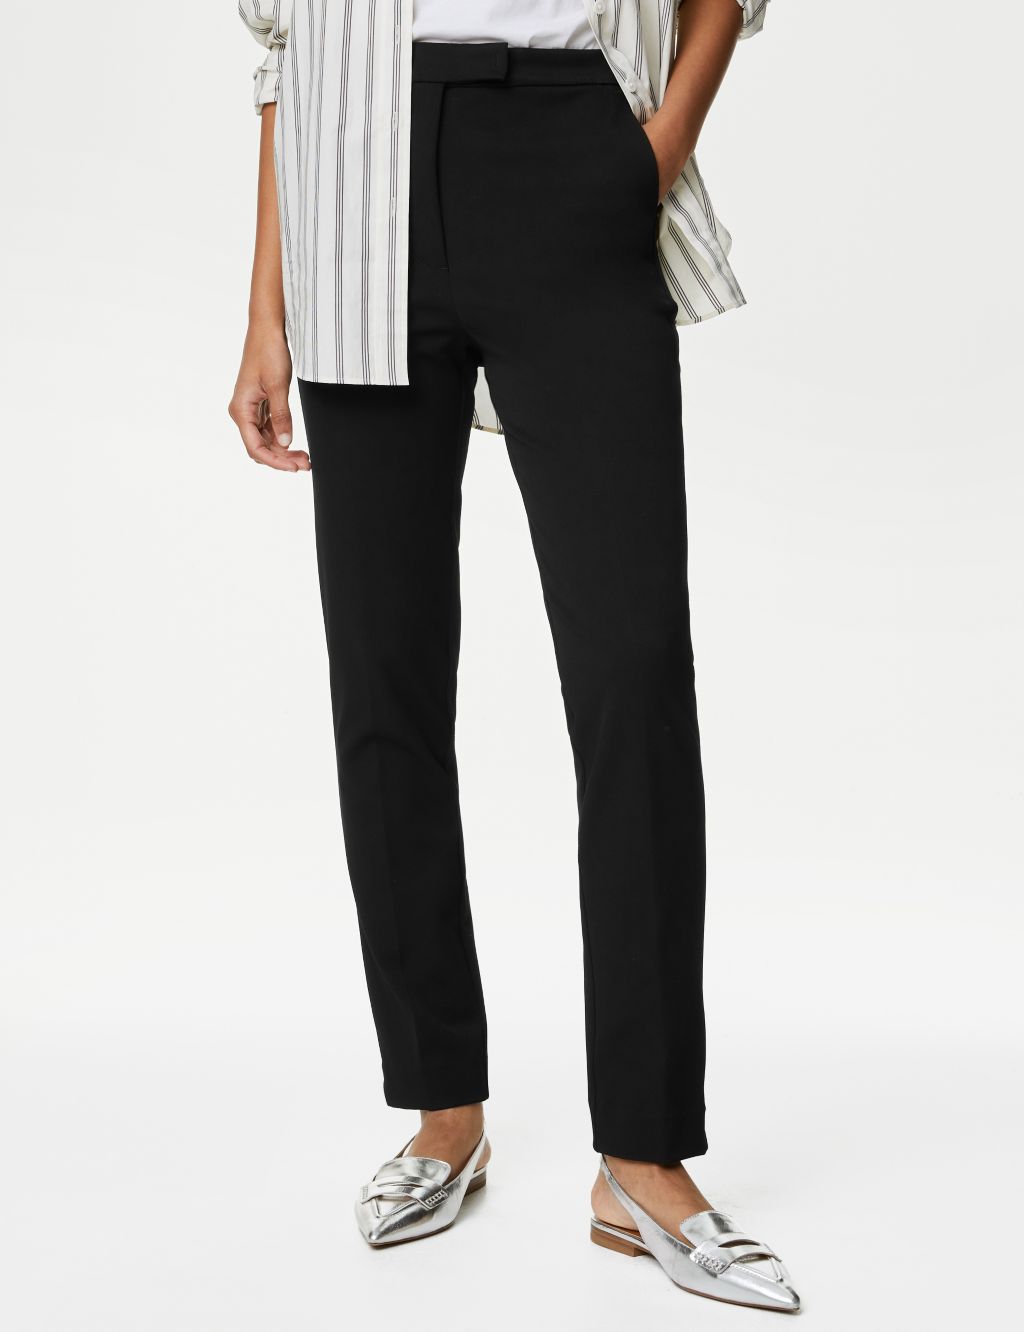 Slim Fit Ankle Grazer Trousers image 3